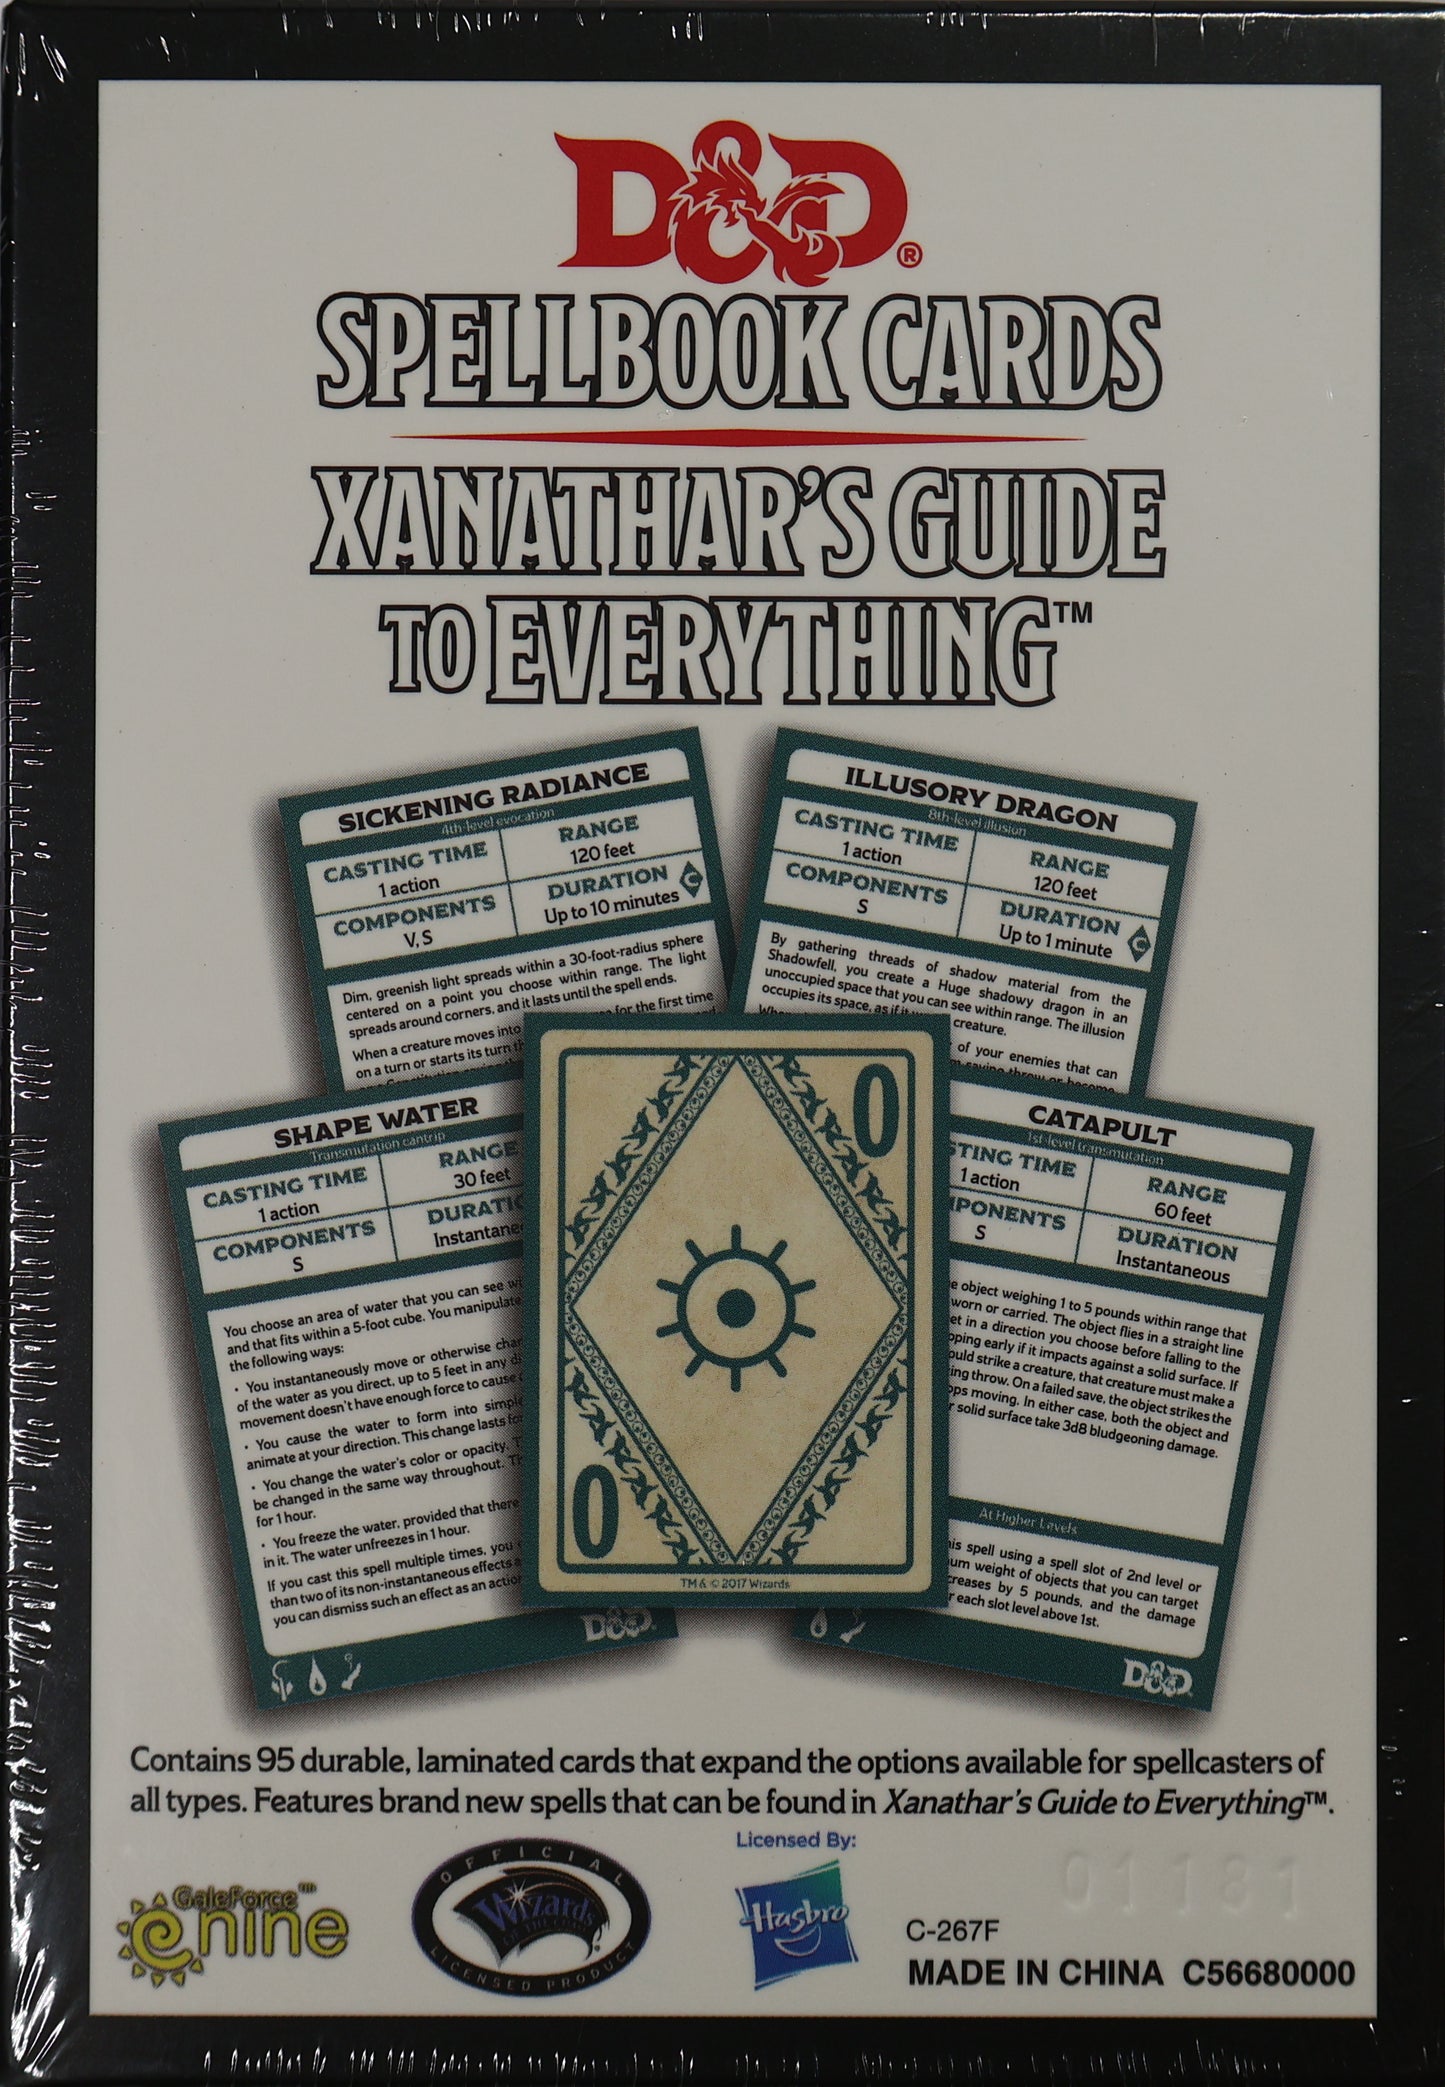 Spellbook Cards Xanathar's Guide to Everything